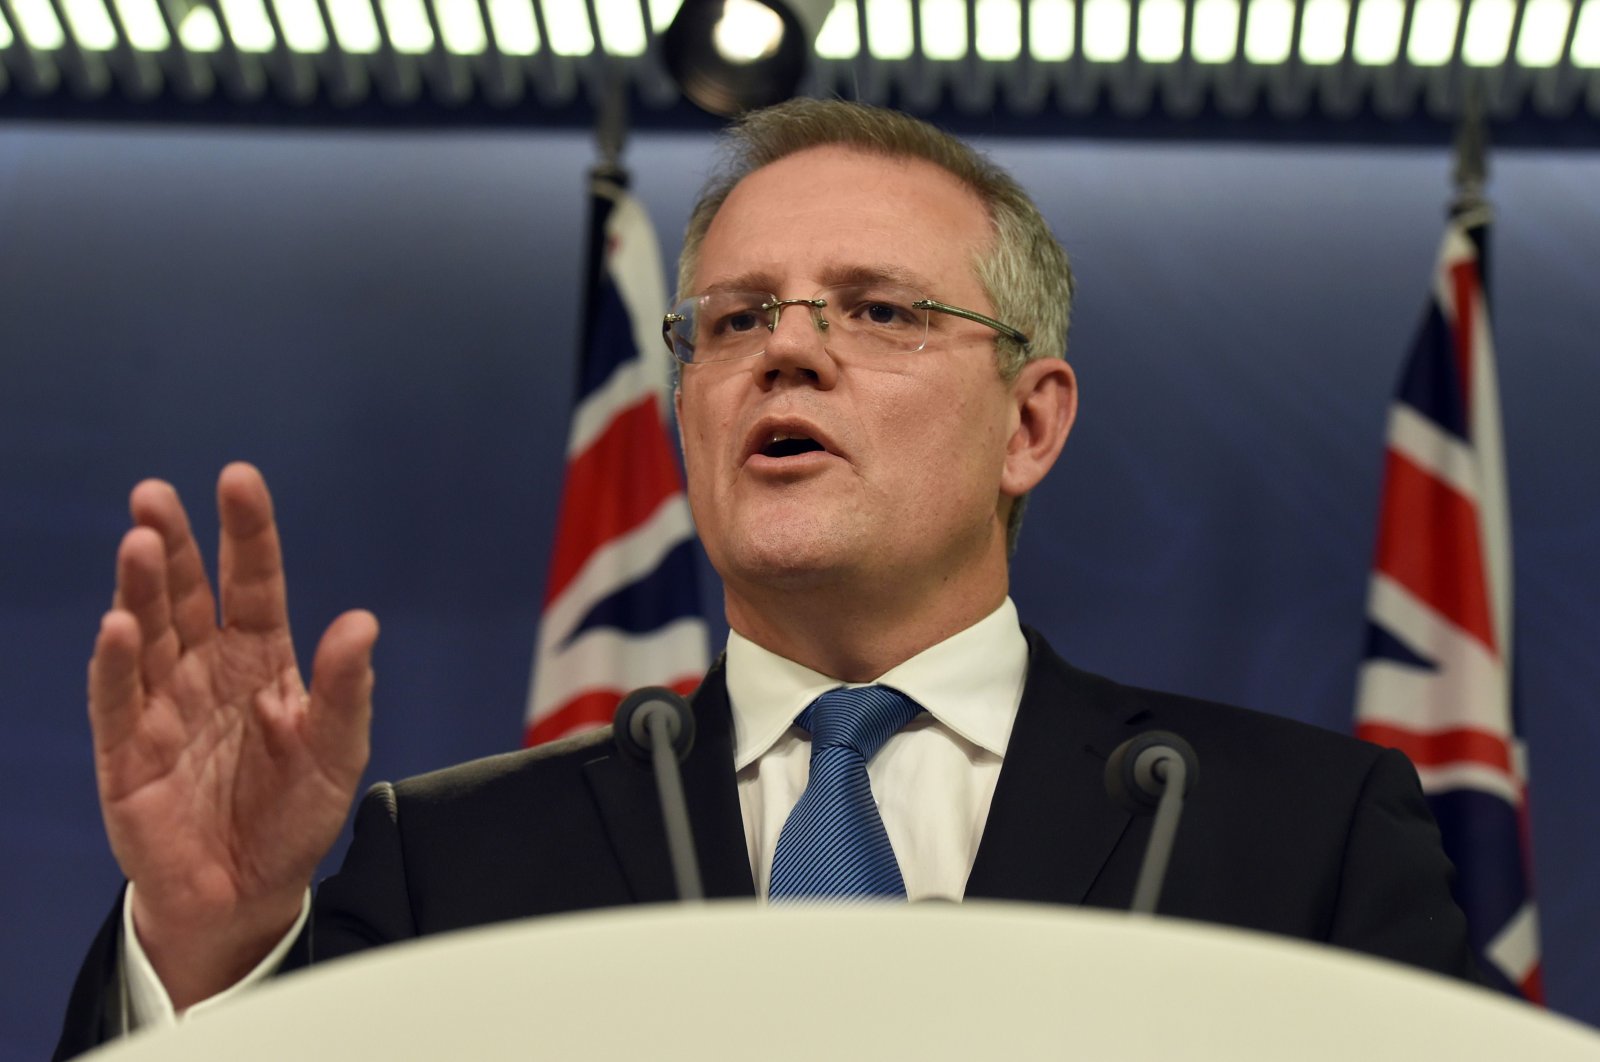 This file photo taken on July 25, 2014 shows Australian Immigration Minister Scott Morrison speaking at a press conference in Sydney. (AFP Photo)